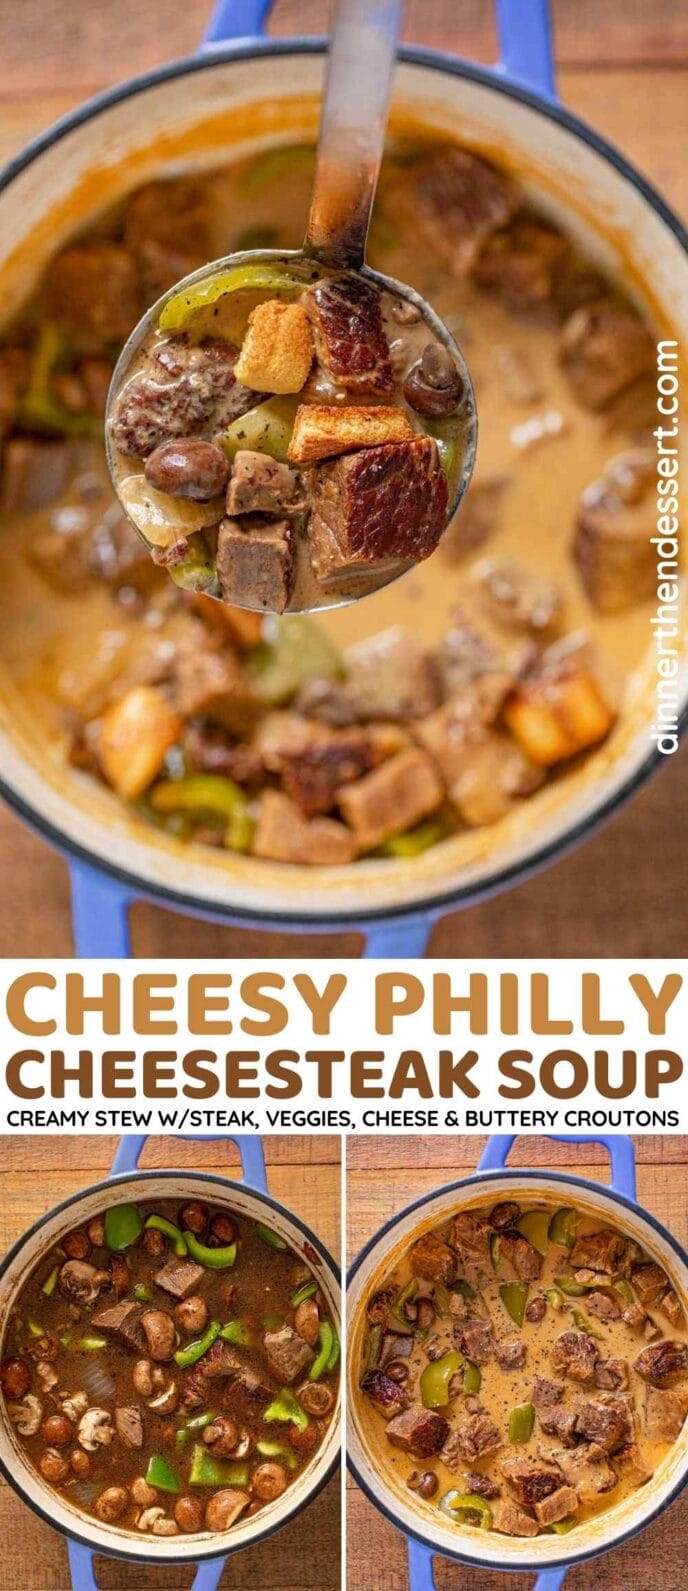 Cheesy Philly Cheesesteak Soup Collage